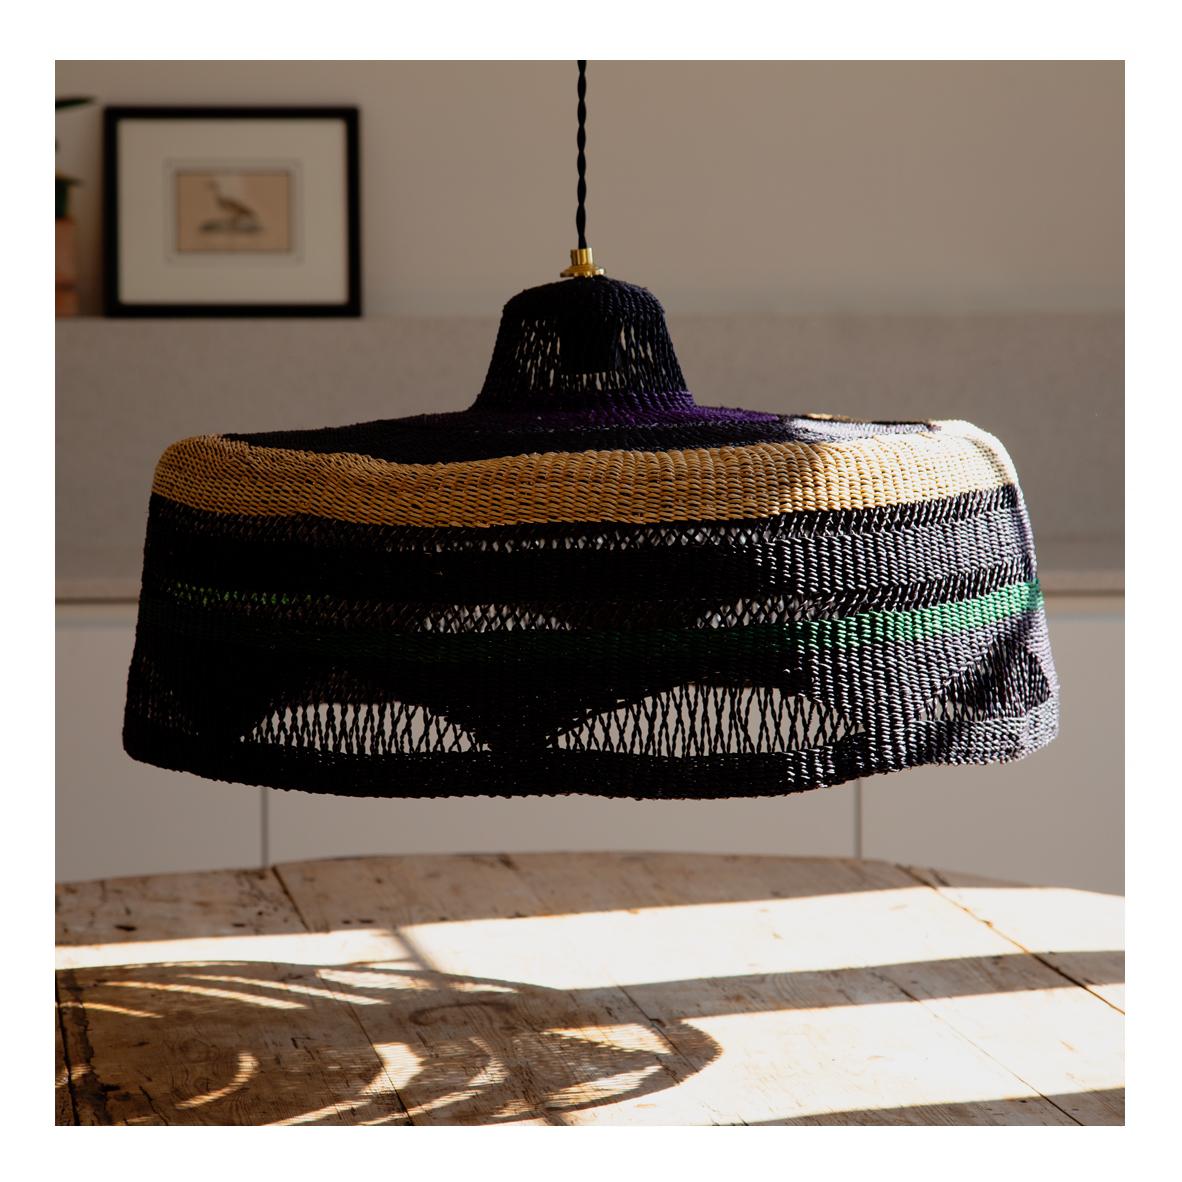 Hand-Woven Contemporary Ethnic Pendant Lamp Patterned Handwoven Straw Natural Green Black